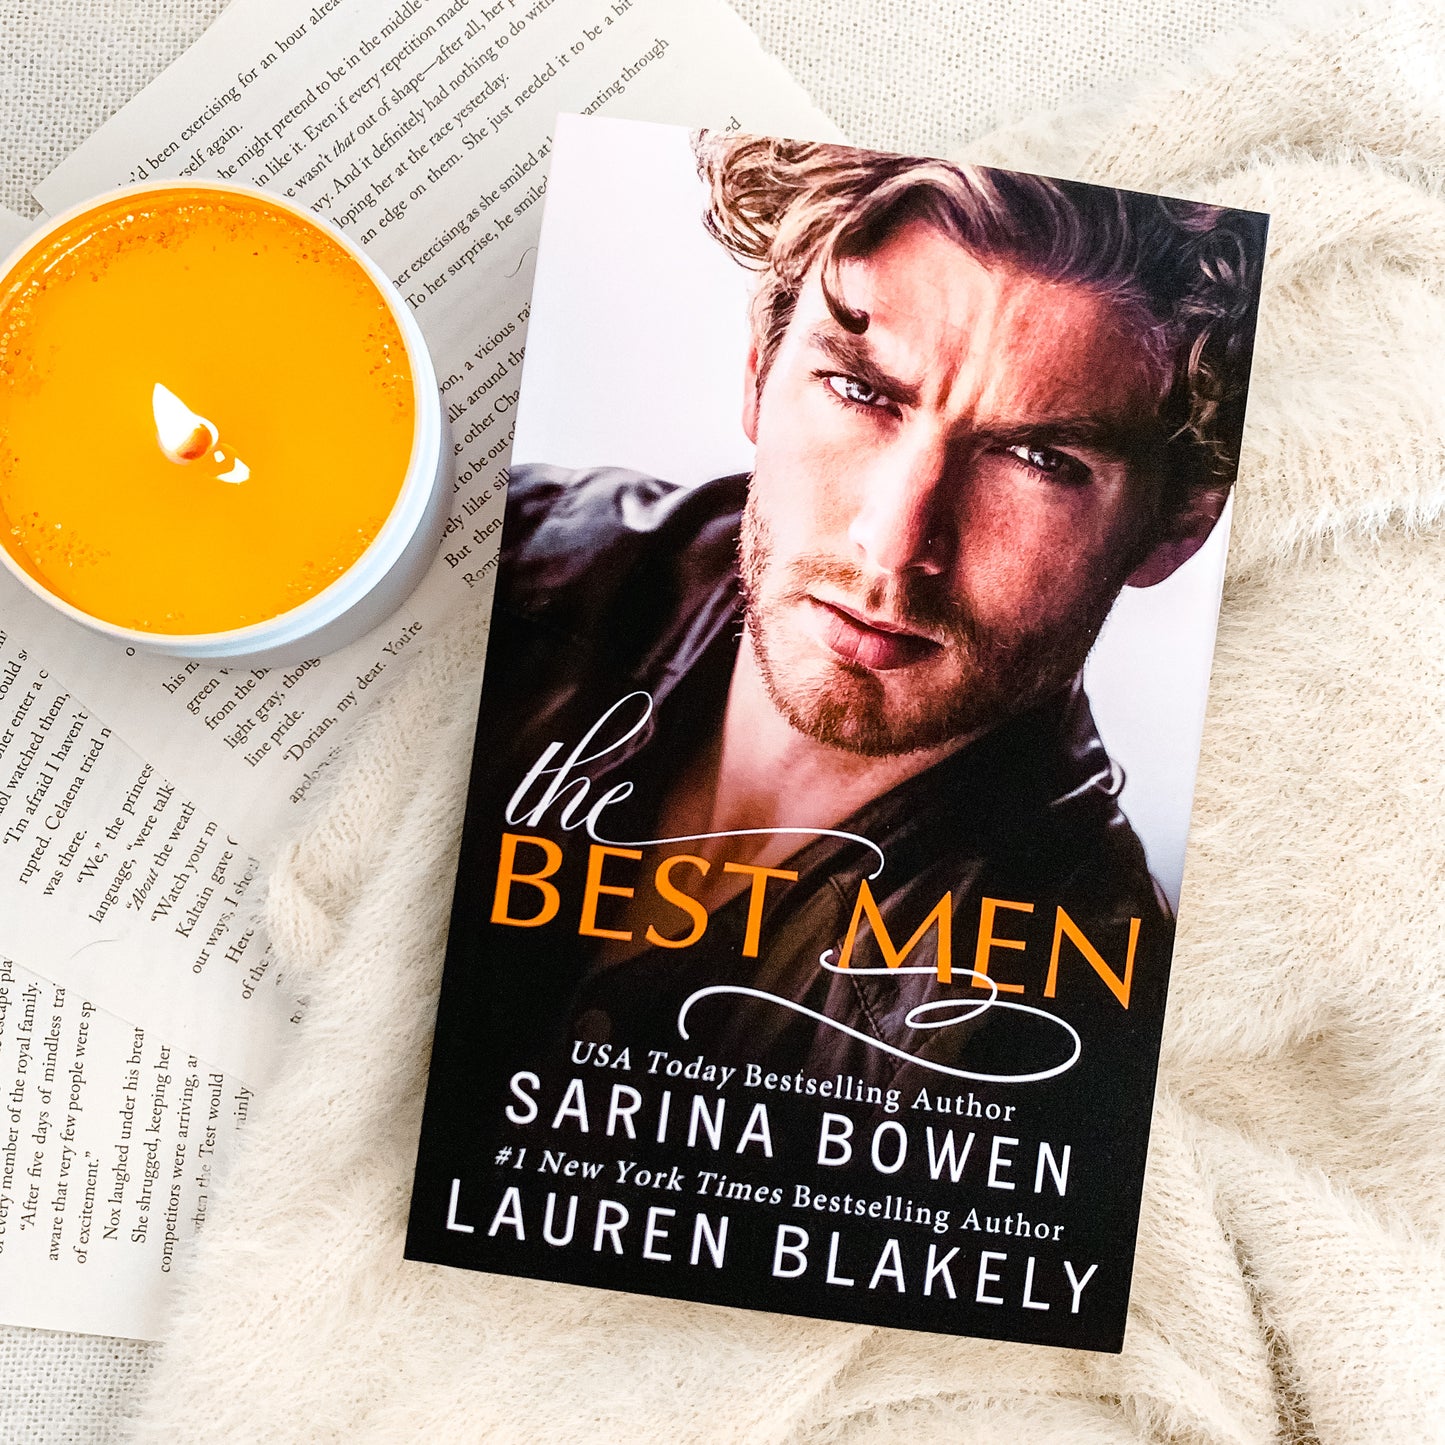 The Best Men by Sarina Bowen and Lauren Blakely